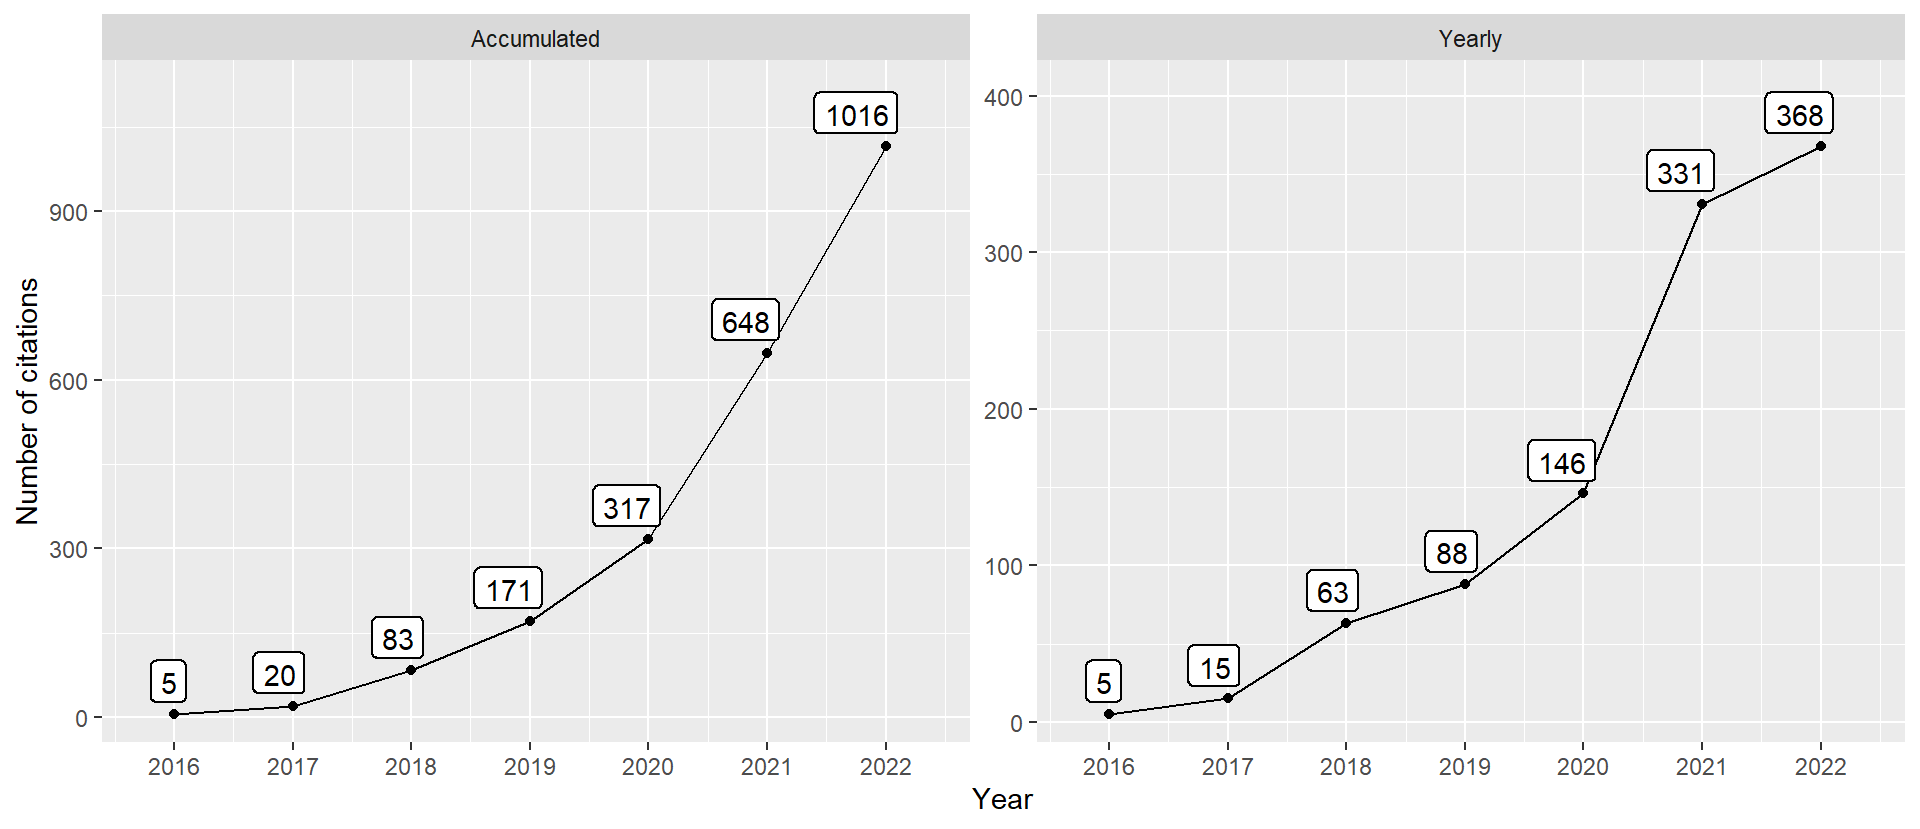 Number of citations over time. Last update at 2022-12-27.